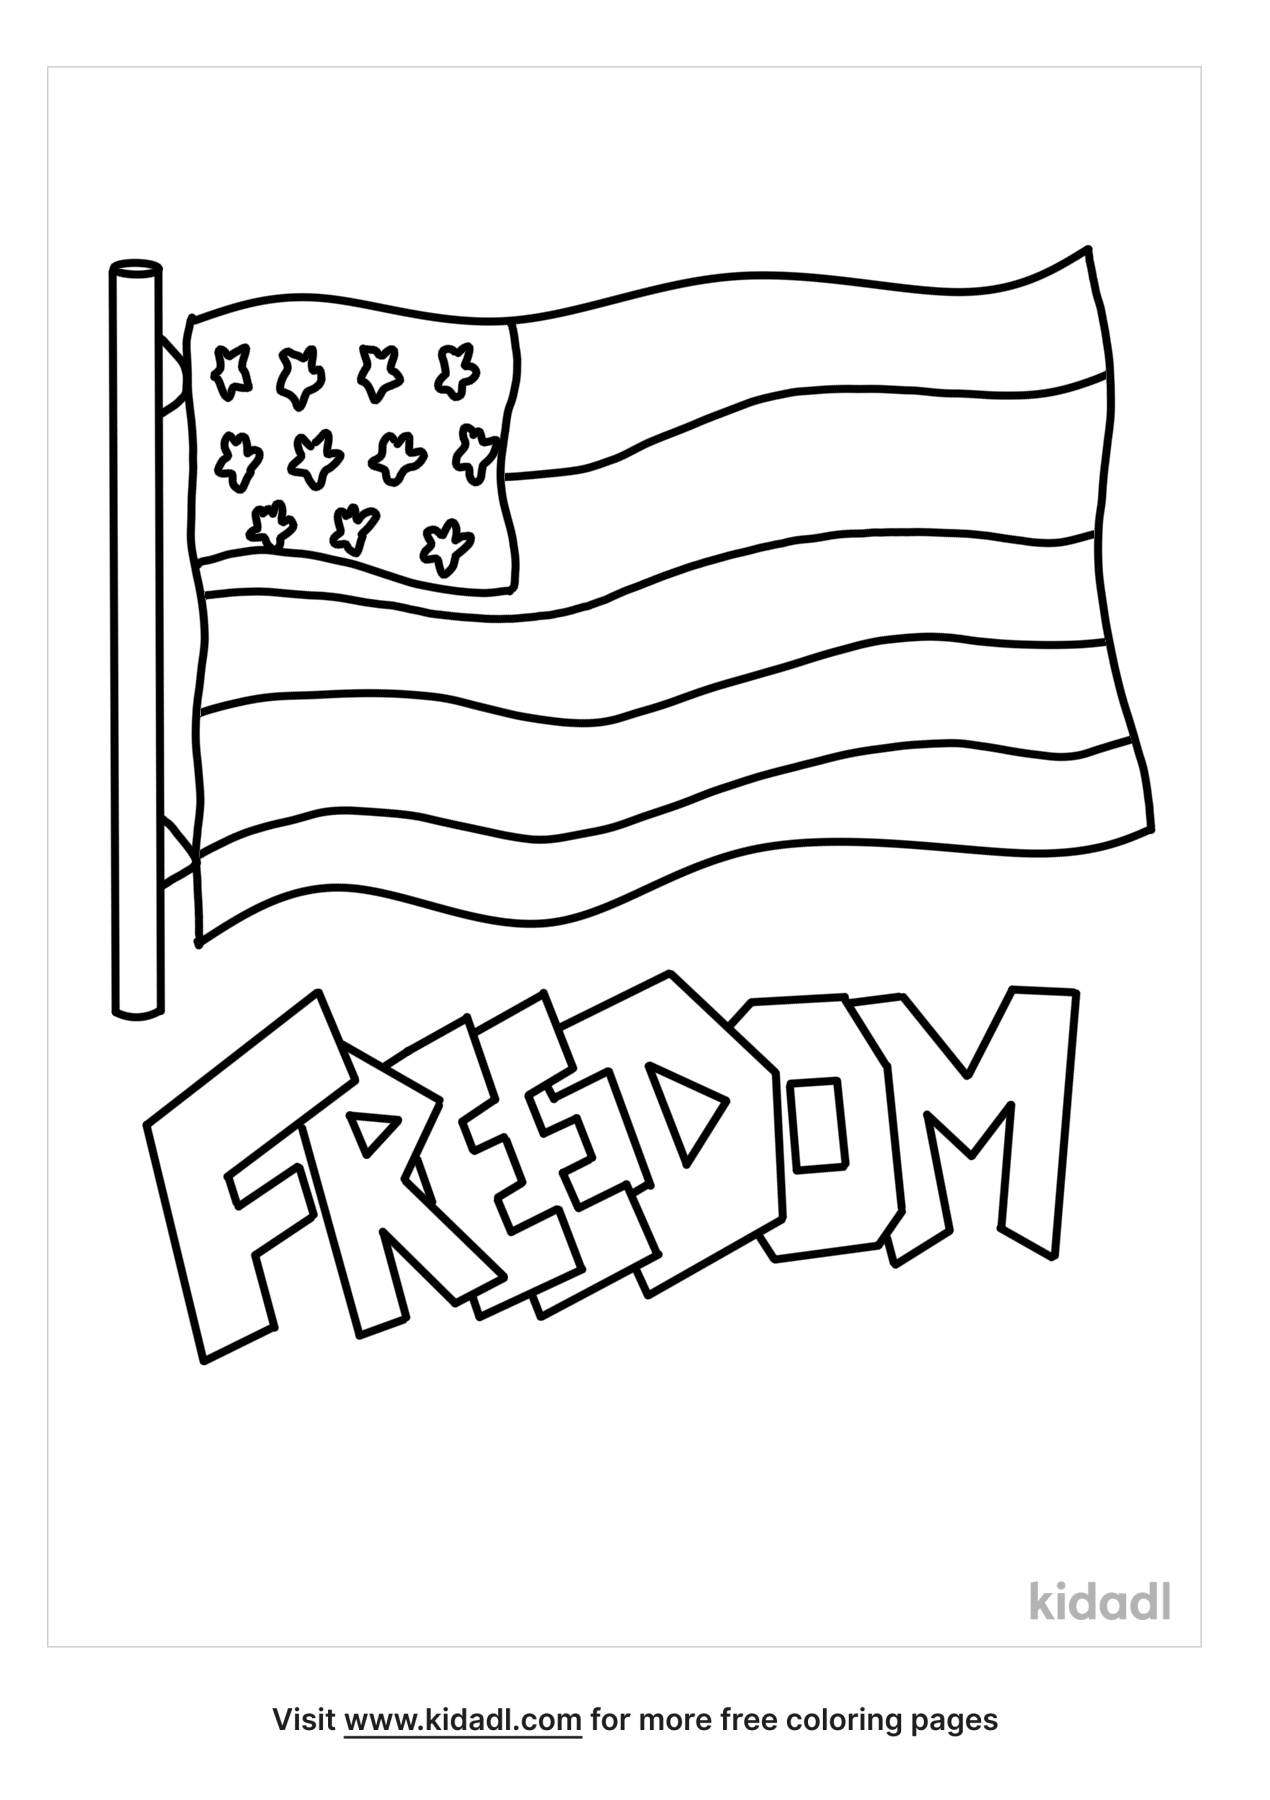 Freedom Coloring Pages | Free Words-and-quotes Coloring Pages | Kidadl